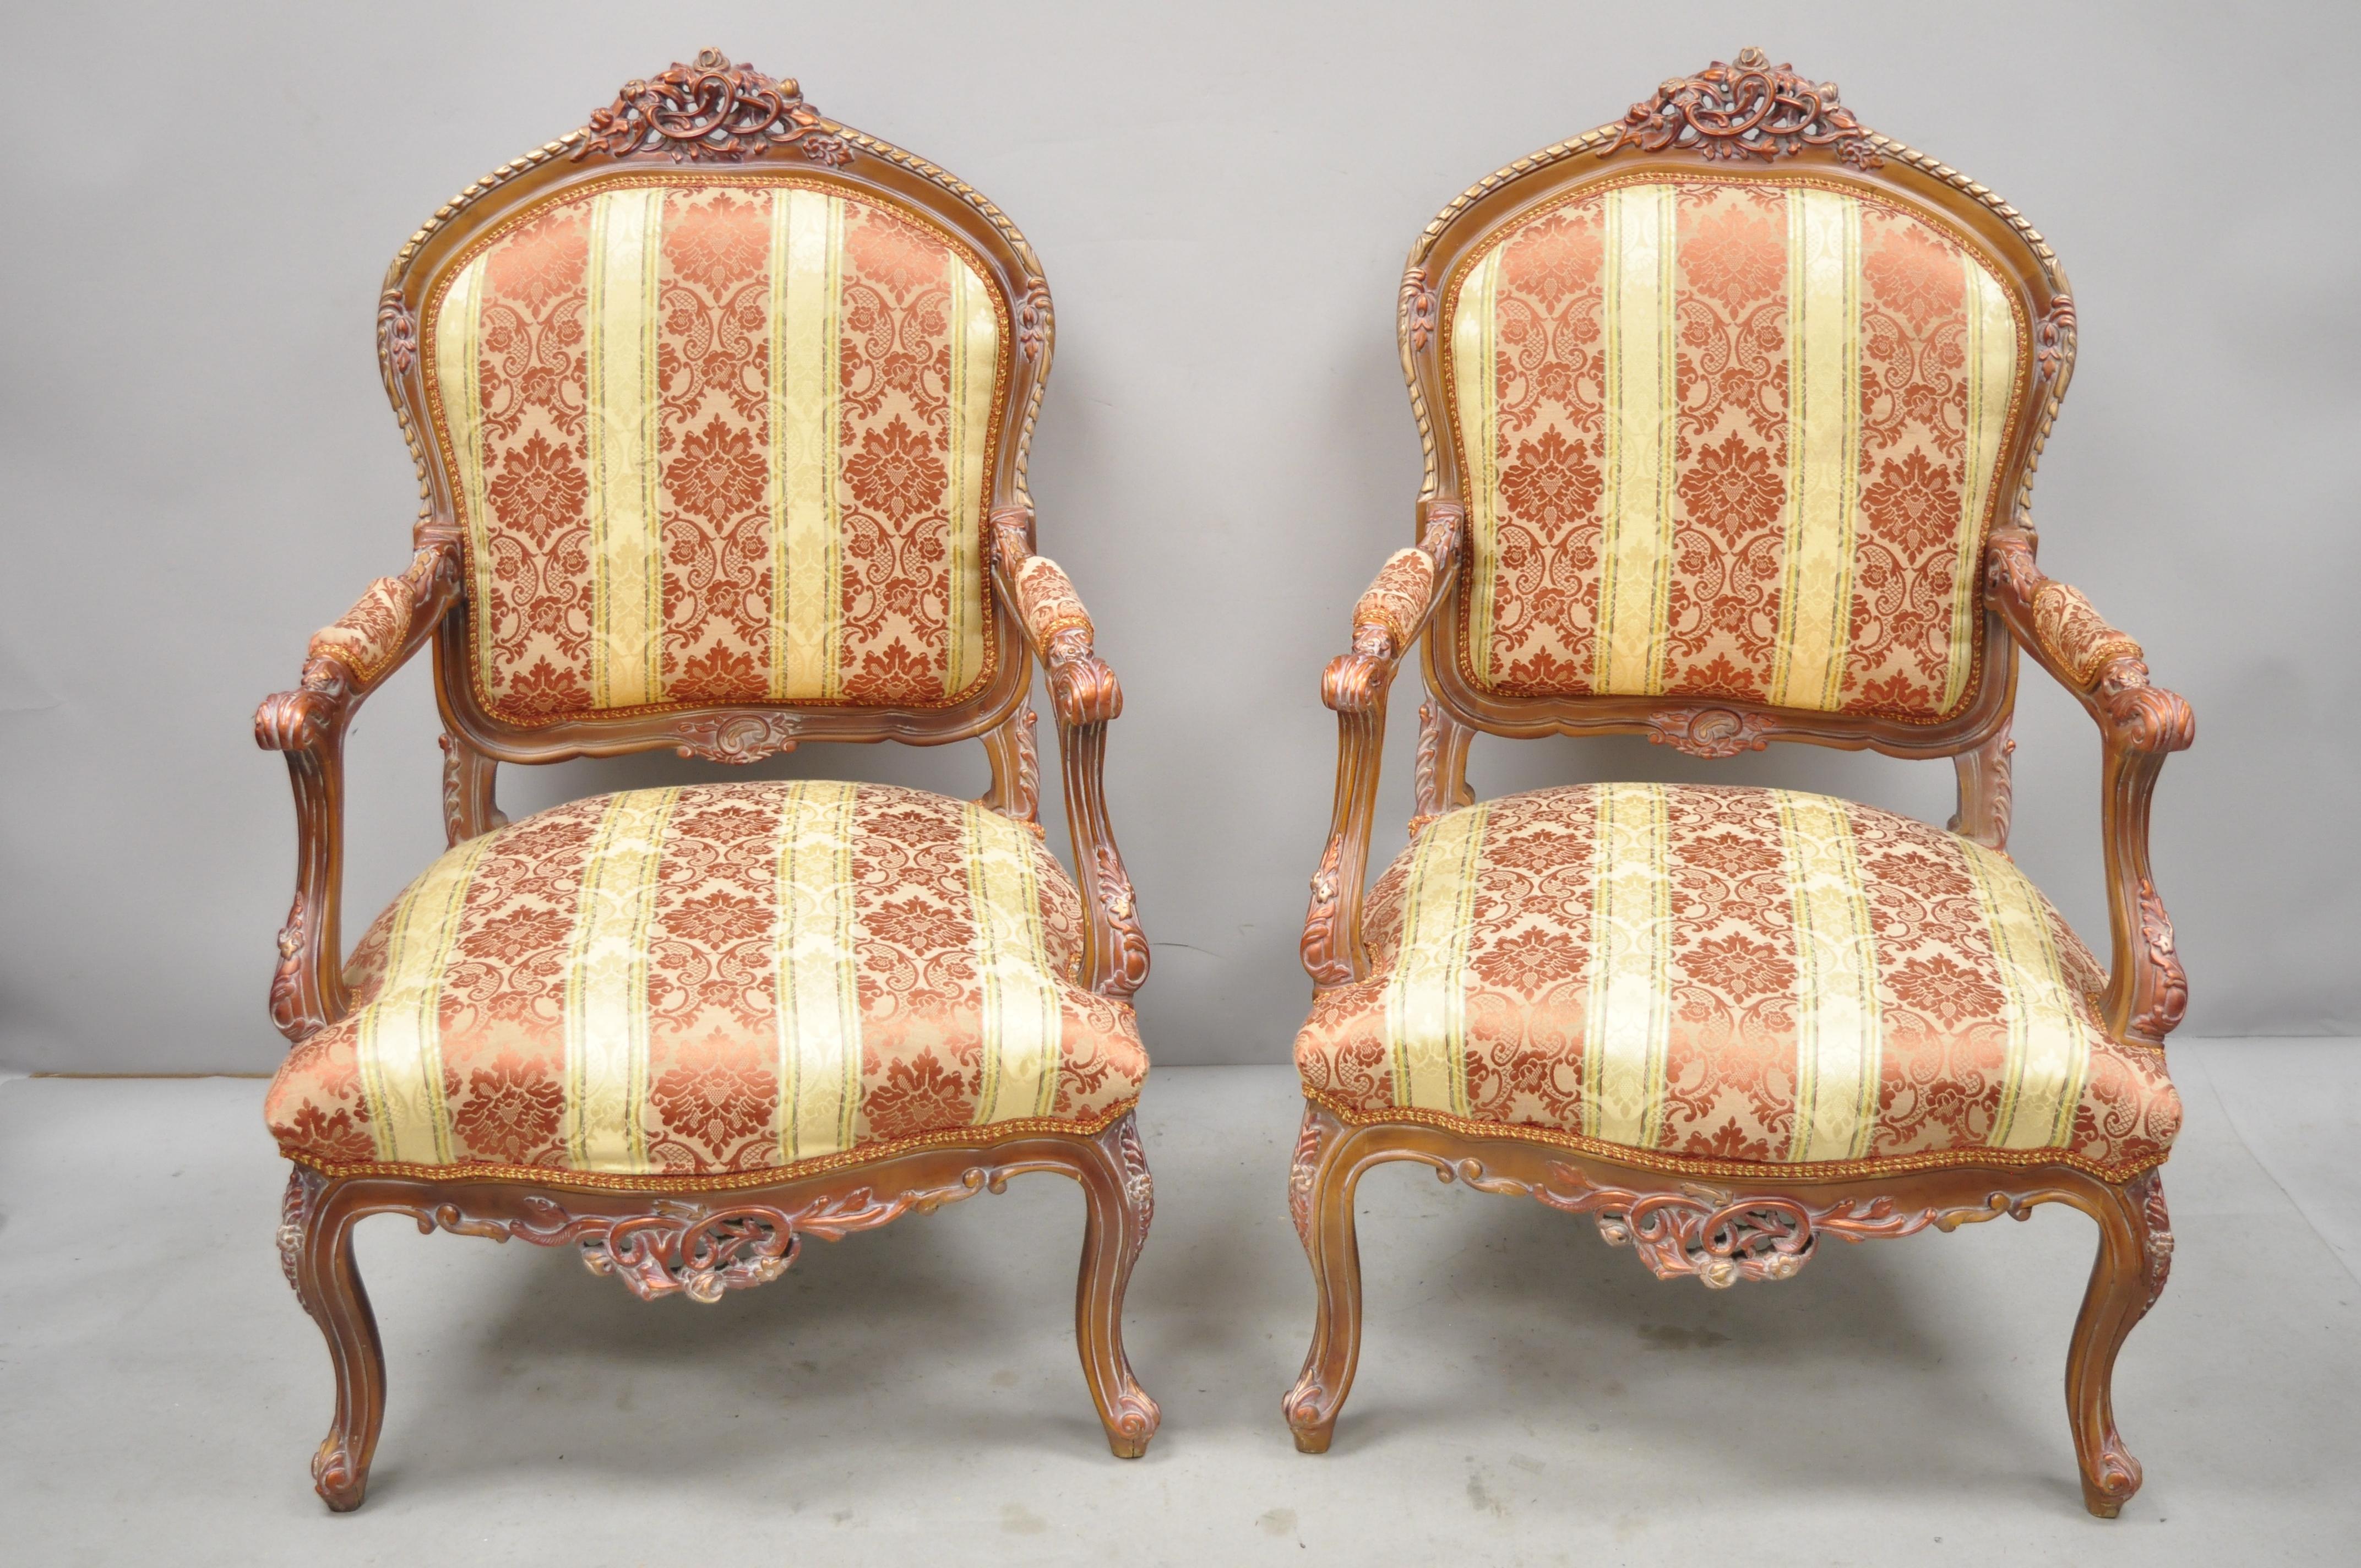 Pair of French Louis XV style repro pink and golf bergere lounge armchairs. Set includes pink and gold upholstery, solid wood frame, upholstered armrests, distressed finish, nicely carved details, cabriole legs, great style and form, circa late